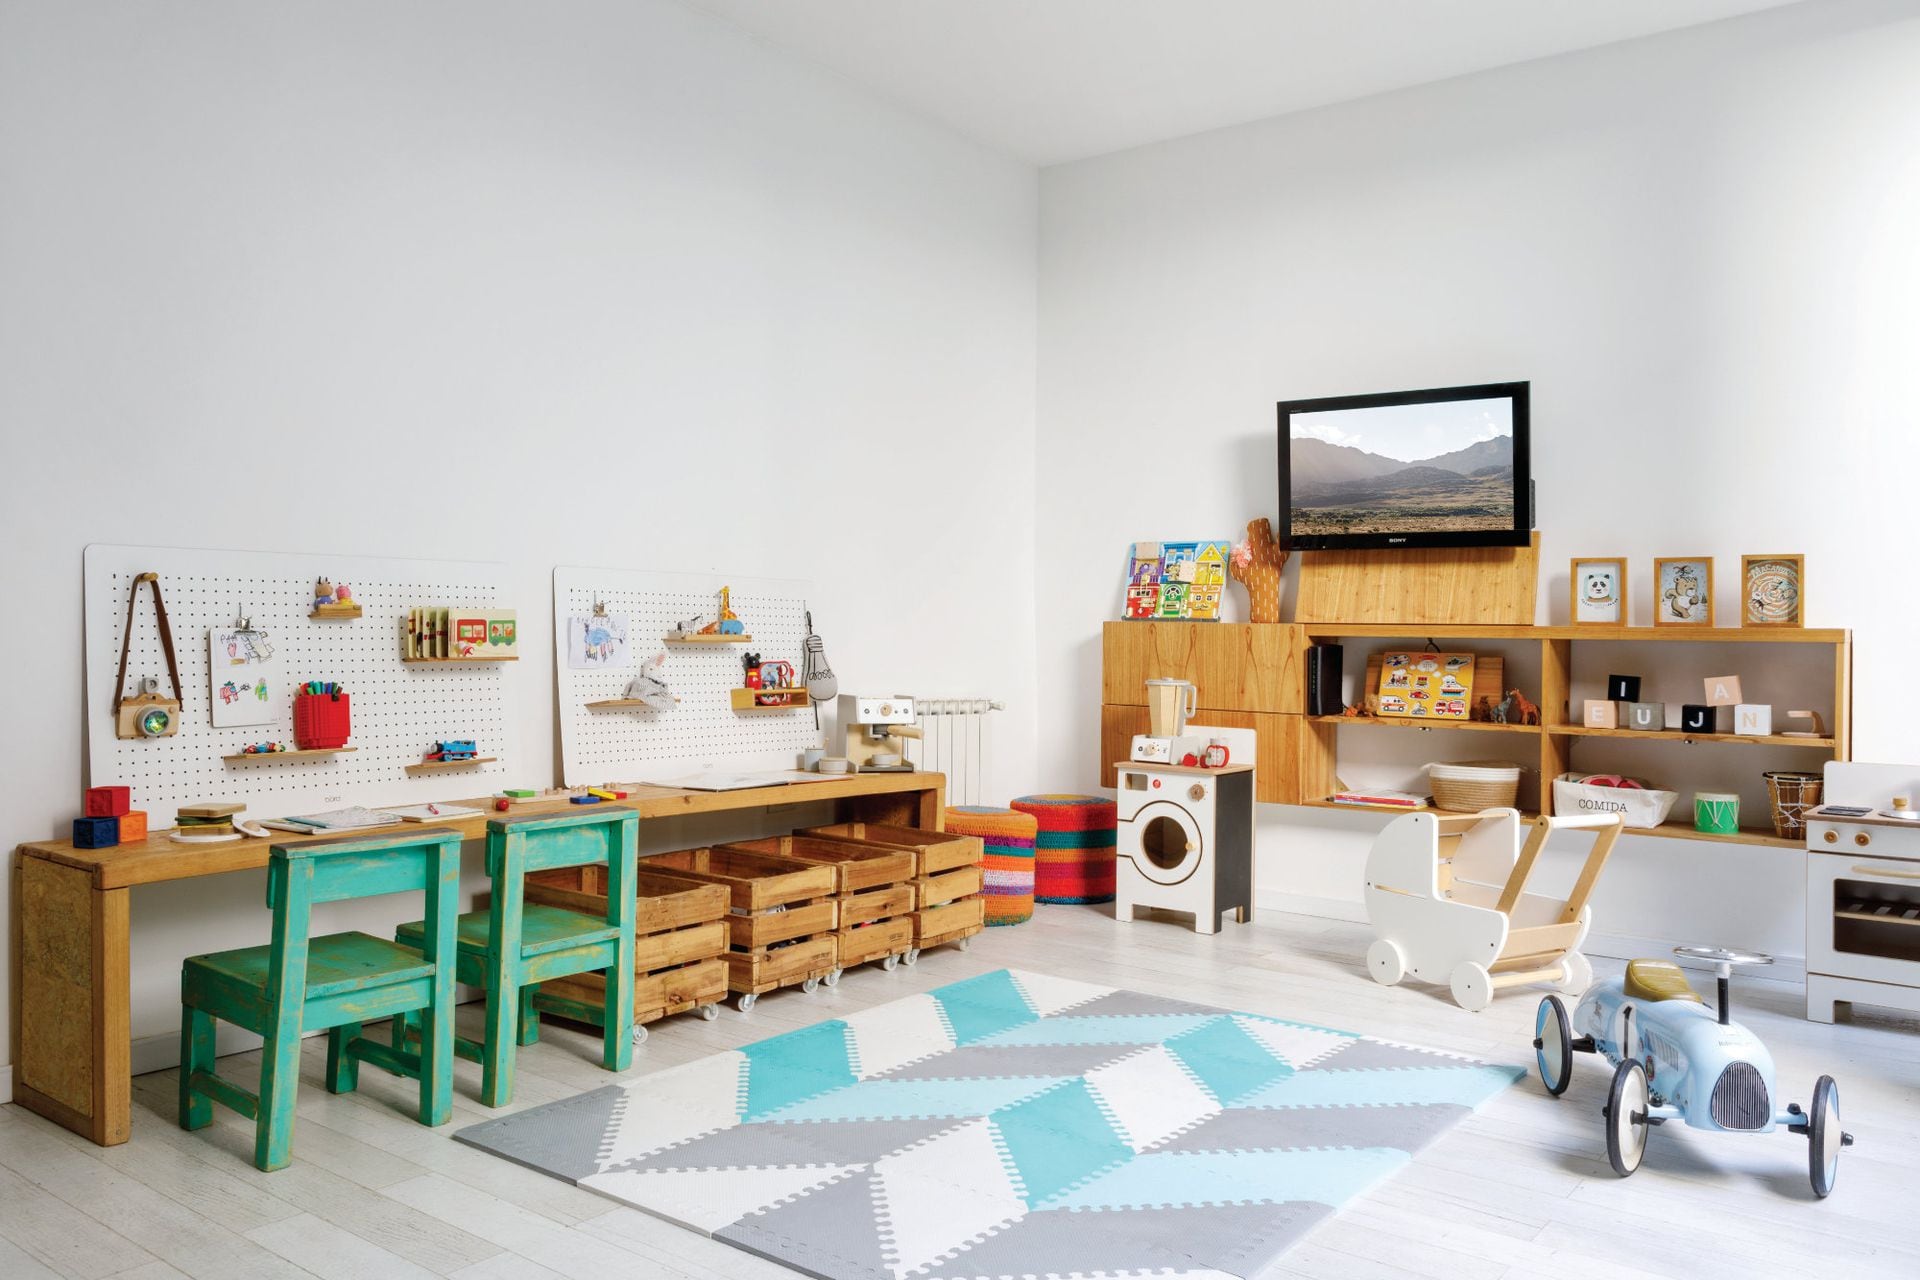 OSB table, chairs and drawers (Pallet Store).  Camera, blender and coffee machine (Lola and Chango).  Kitchen, washing machine, wooden stroller (Guri Play).  Boards (Börd Deco)